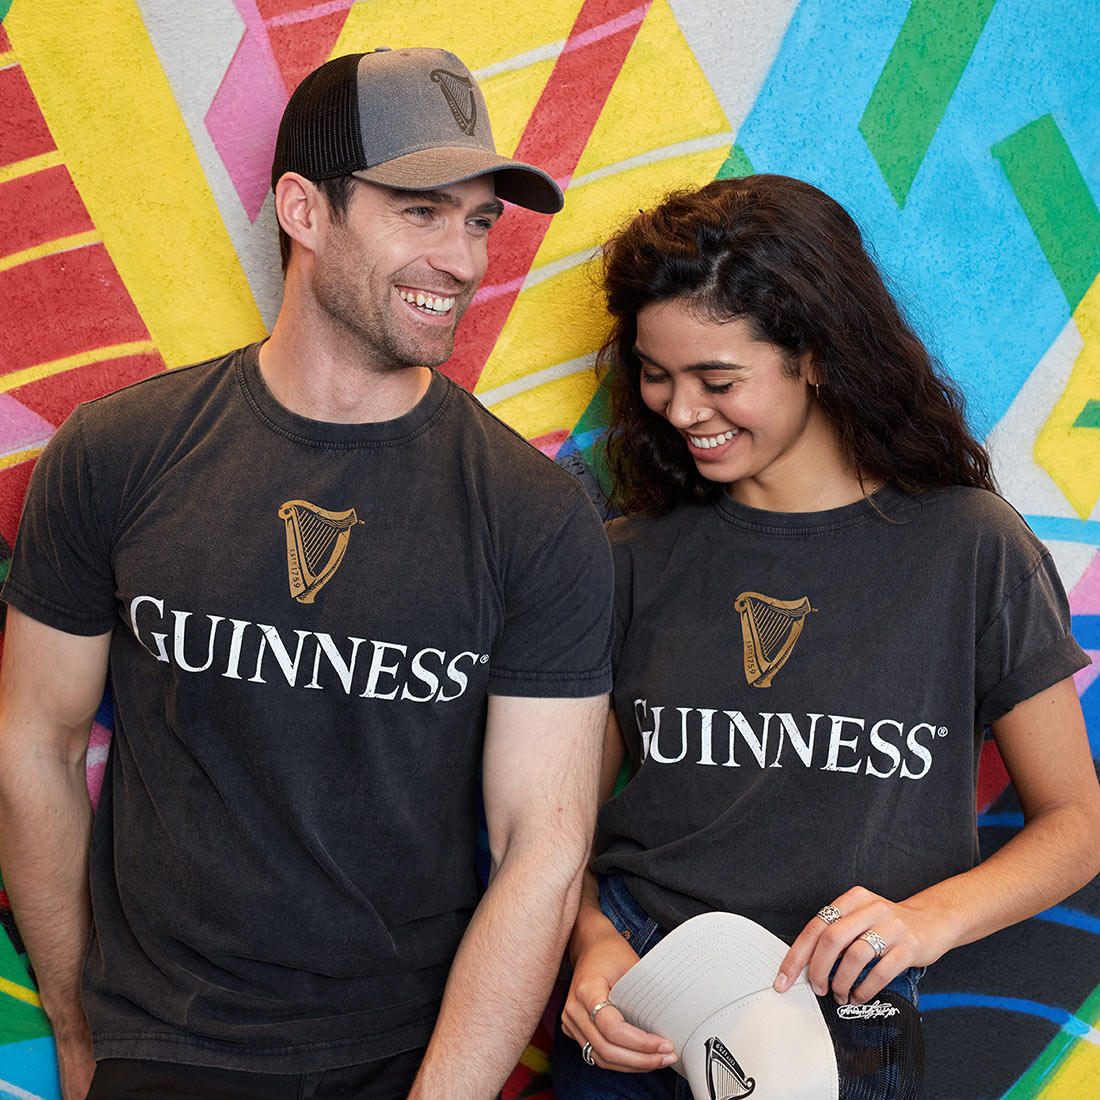 Distressed Guinness t-shirts, featuring the iconic Guinness trademark have been replaced with the "Guinness Distressed Trademark Label T-Shirt" brought to you by the brand, Guinness.